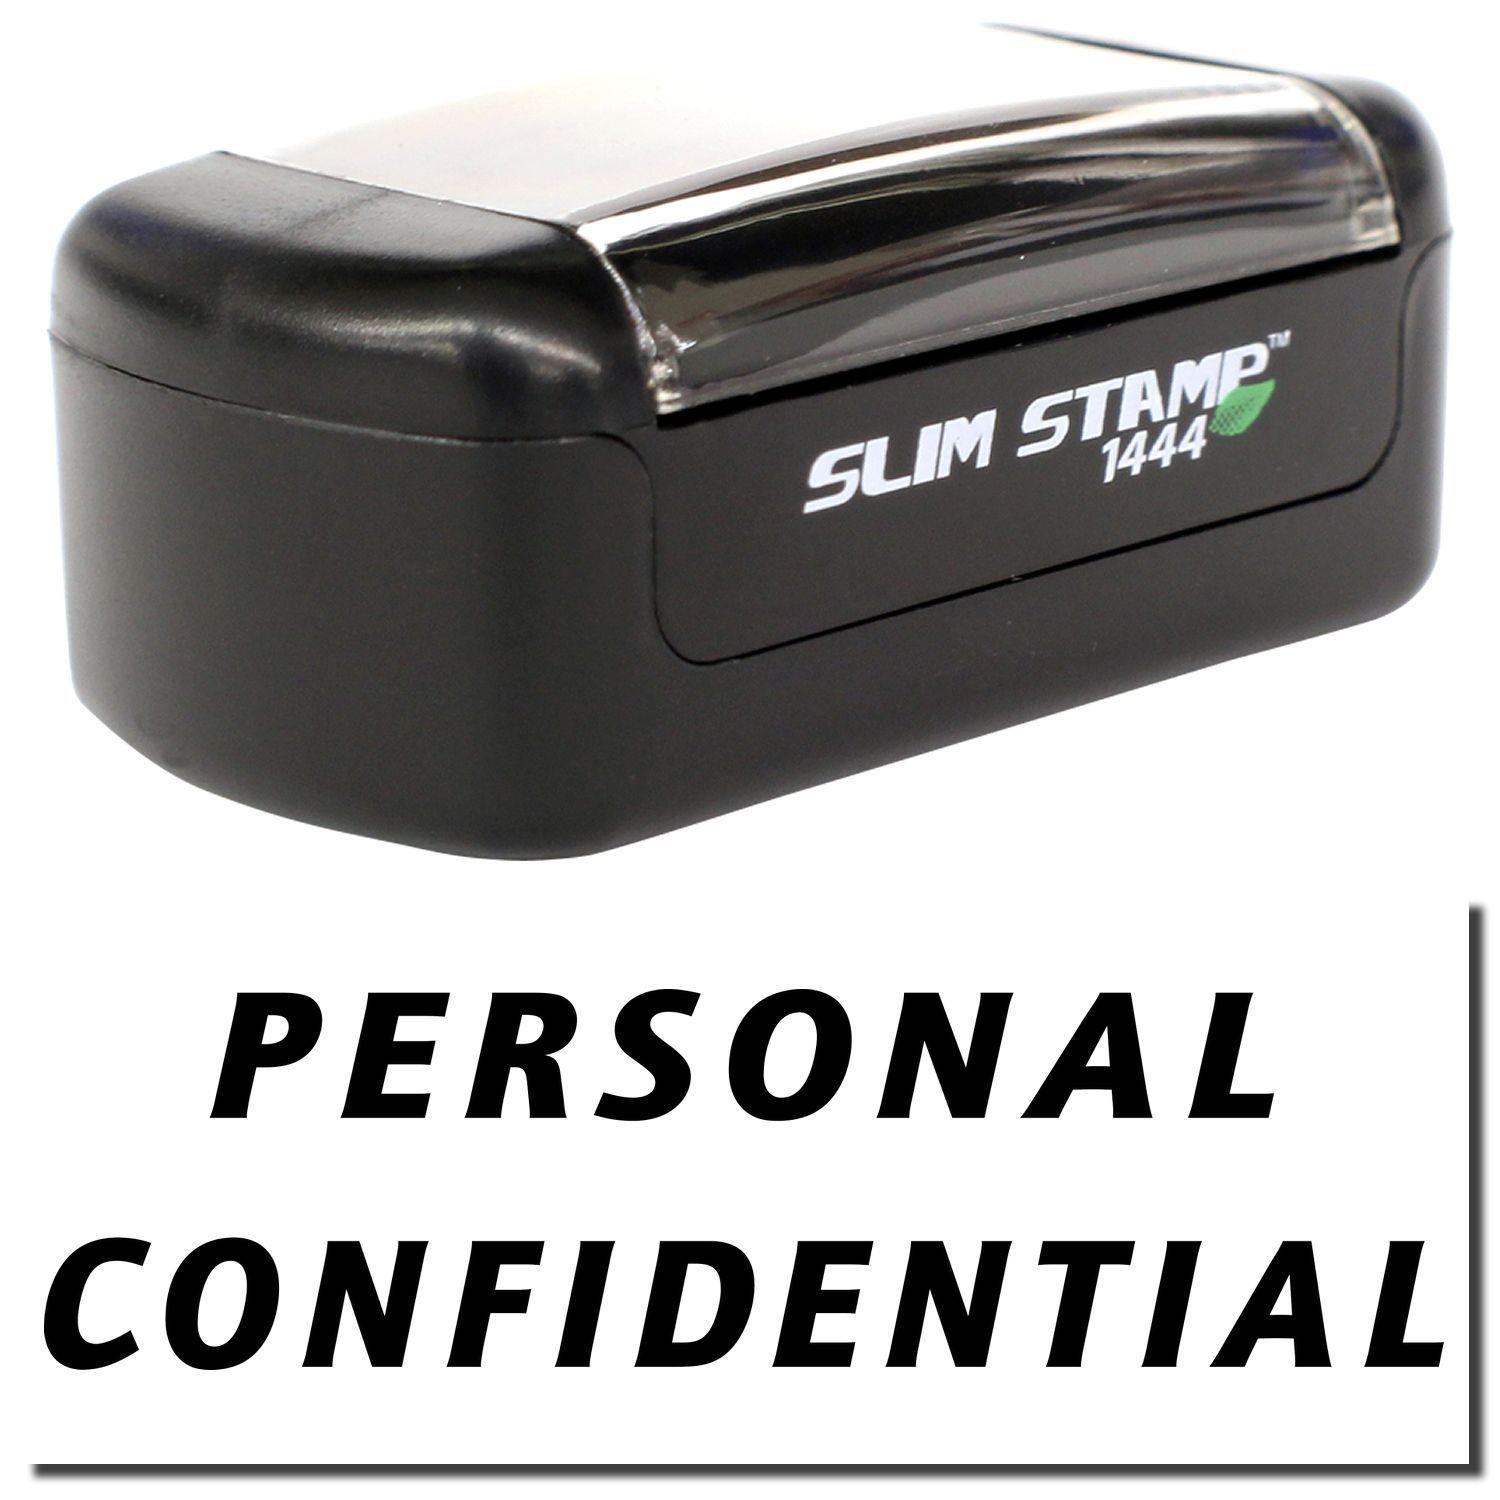 A stock office pre-inked stamp with a stamped image showing how the text "PERSONAL CONFIDENTIAL" in italic font is displayed after stamping.